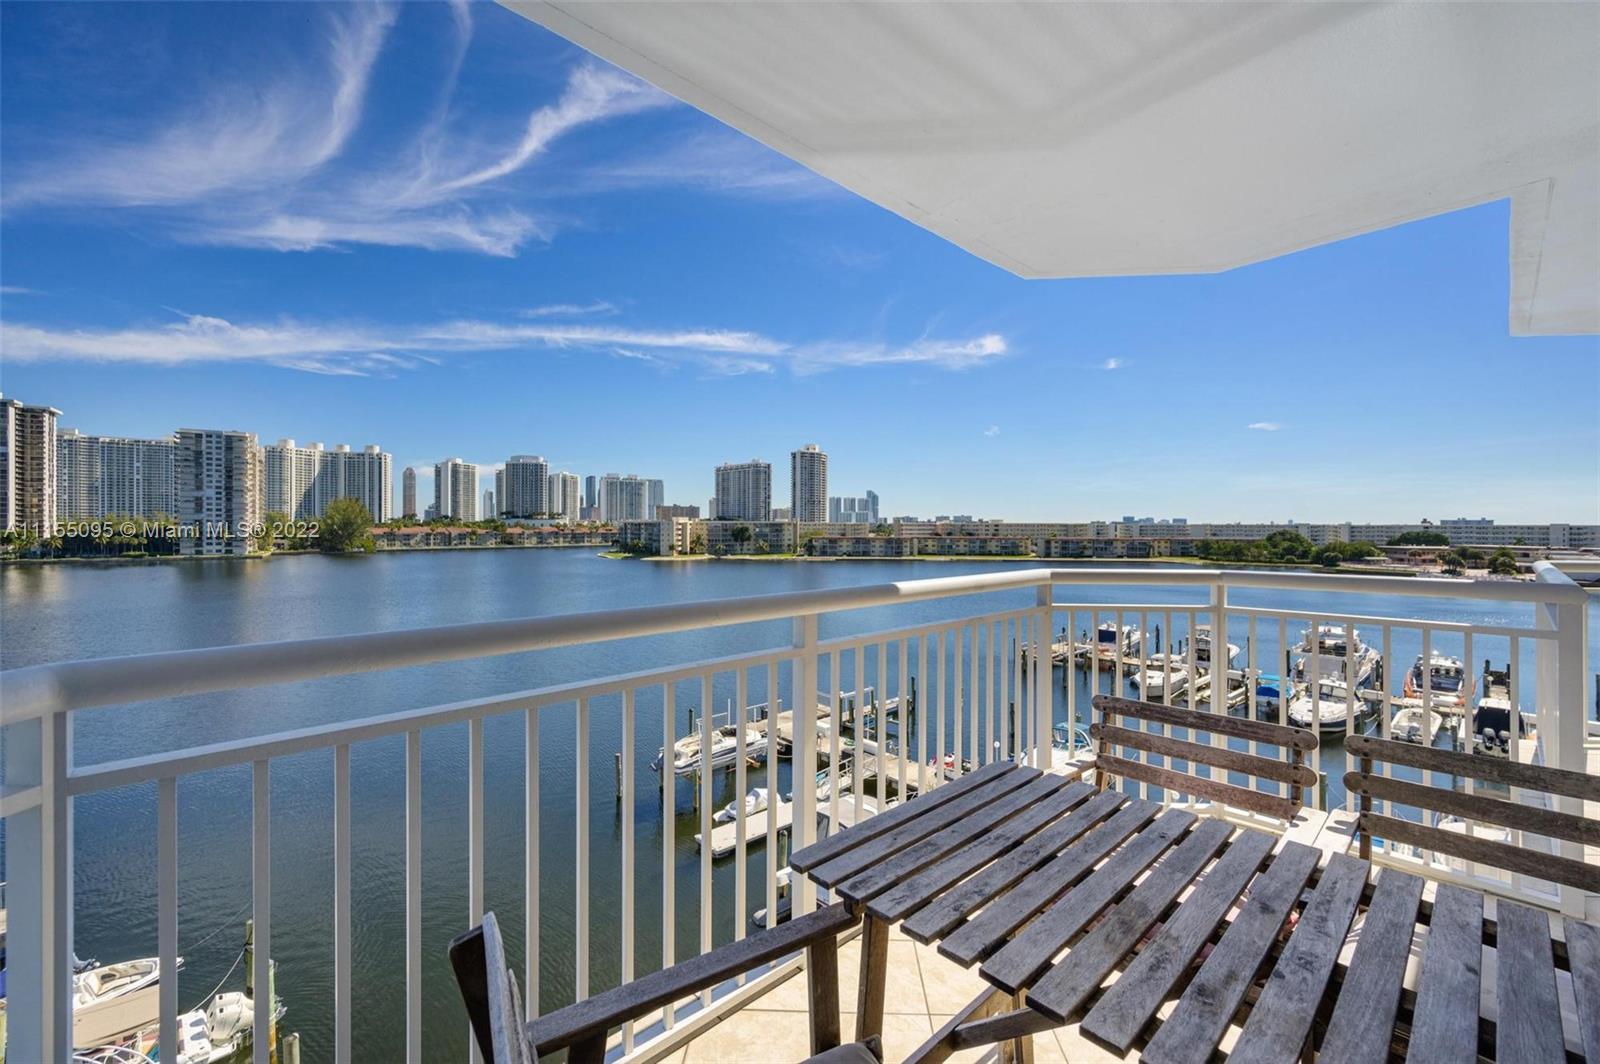 BEAUTIFUL WATER VIEW FROM THIS 2 BEDROOM 2 BATHROOM APARTMENT IN AVENTURA. WRAP AROUND BALCONY WITH 